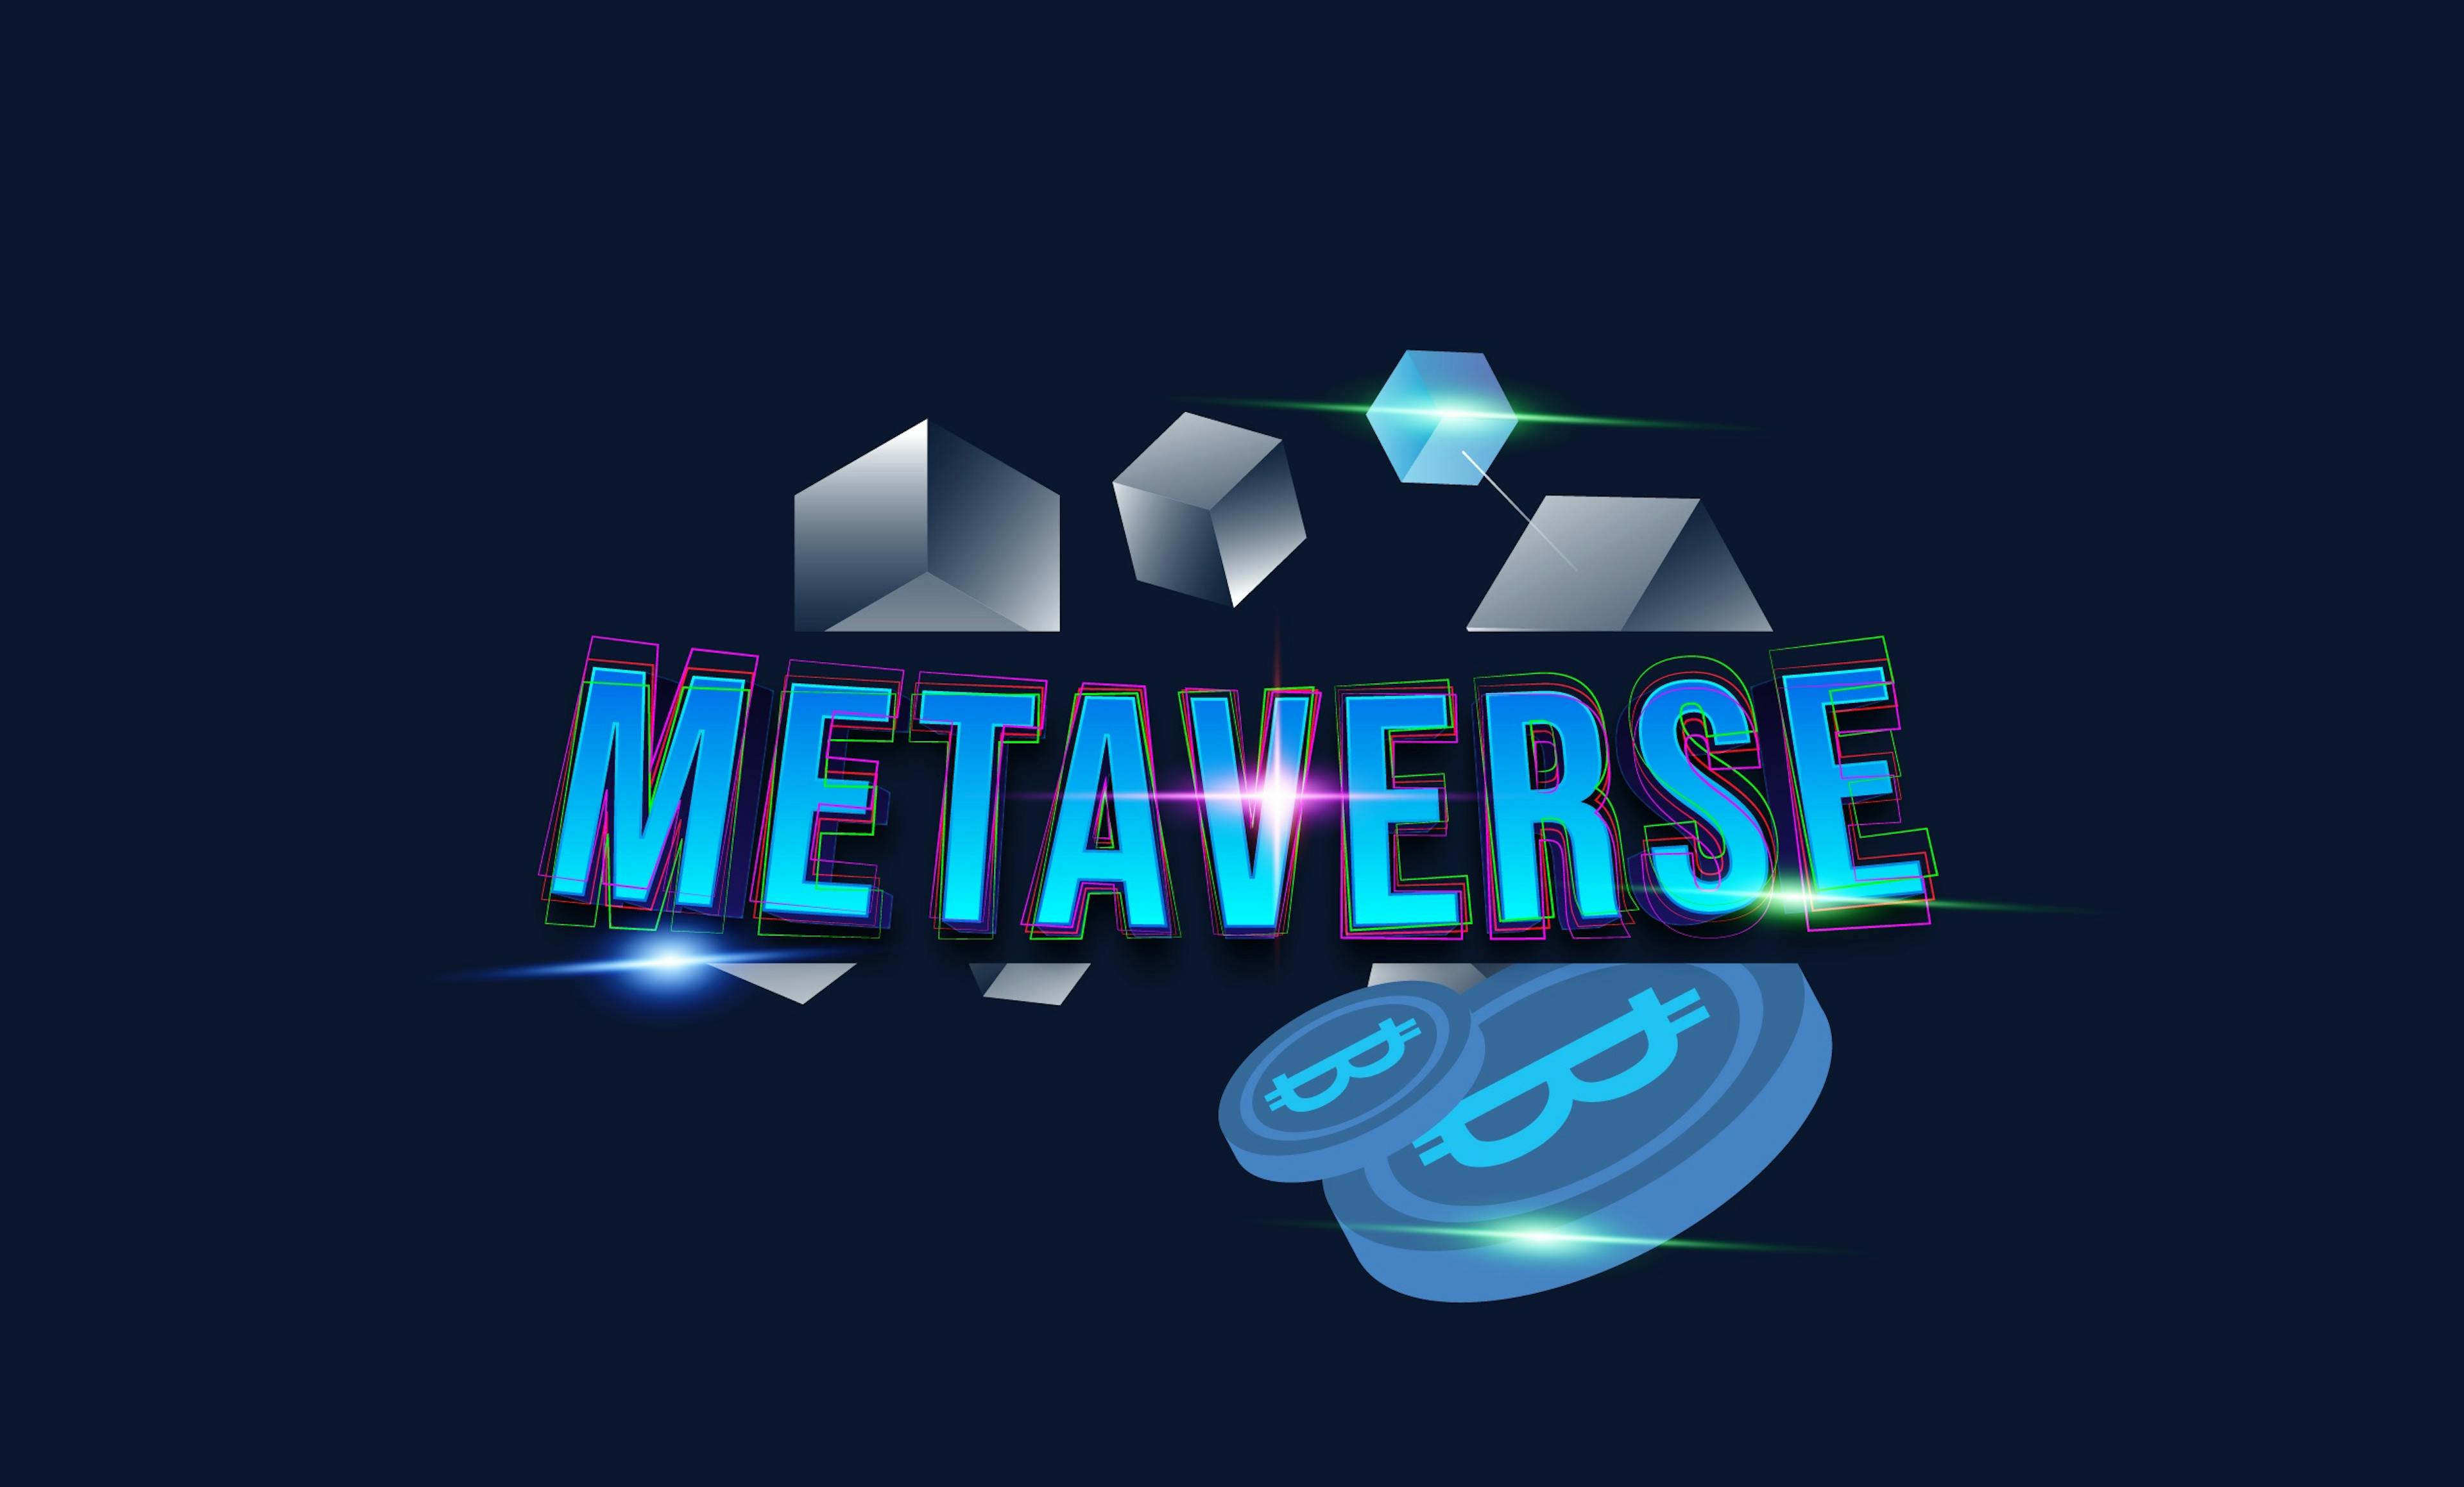 featured image - Is there a Bitcoin-Like Project in the Metaverse Space?